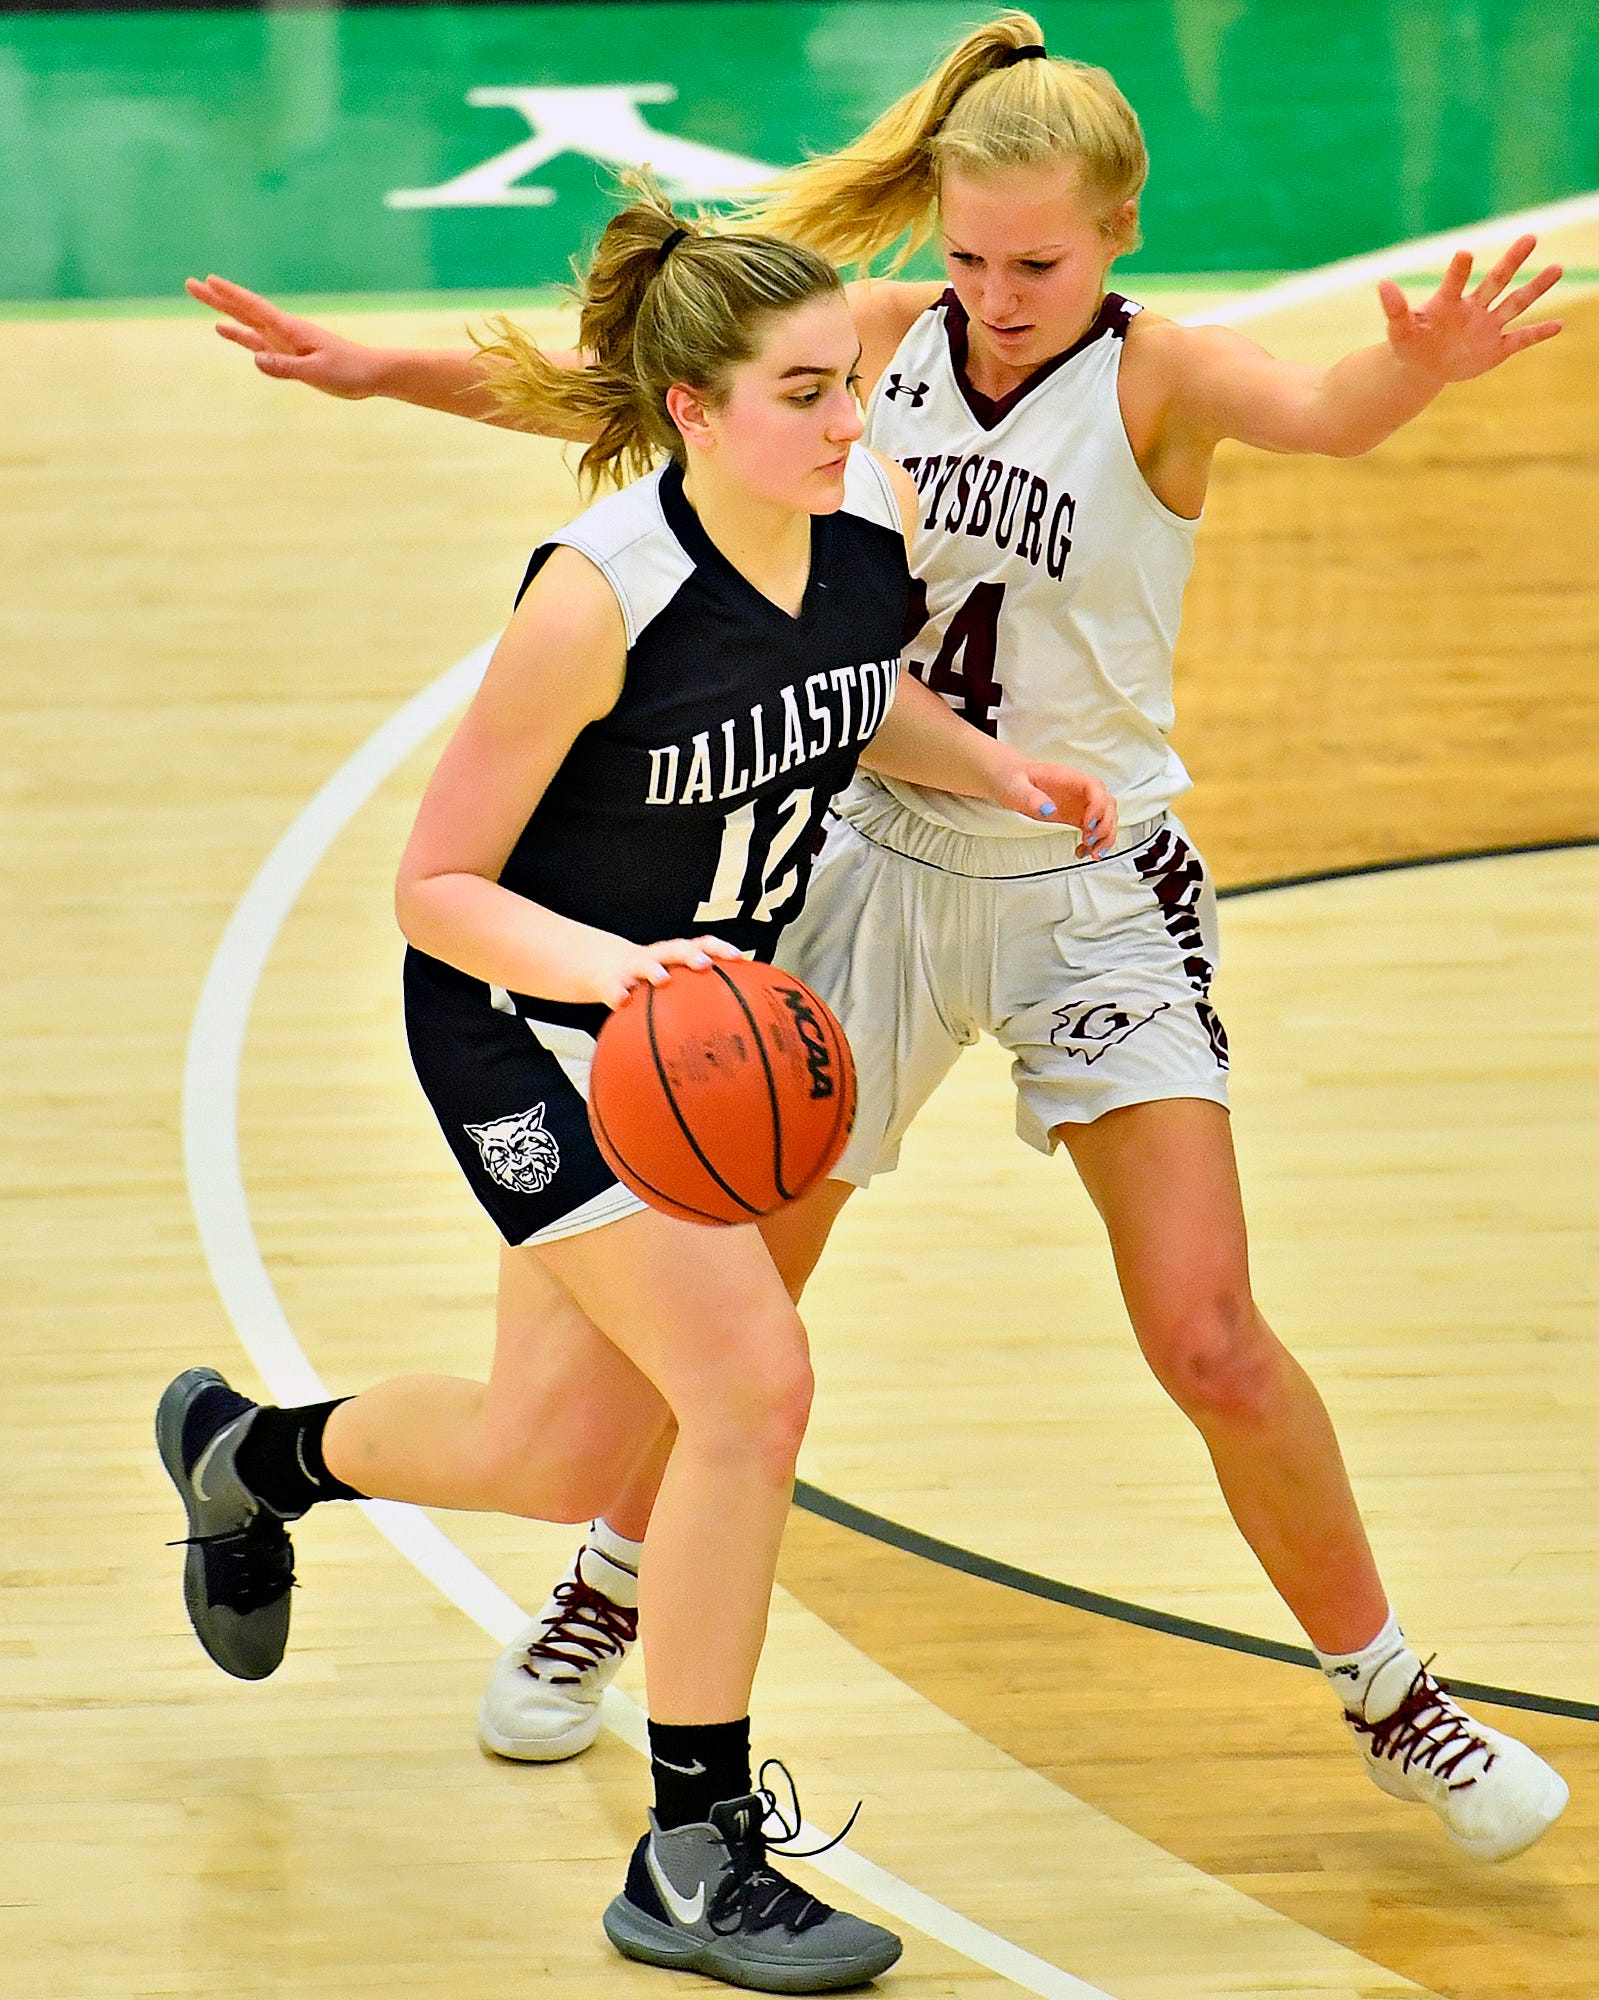 Dallastown's Ashley Harbold, left, works to get past Gettysburg's Anne Bair during YAIAA girls' basketball championship action at Grumbacher Sport and Fitness Center at York College of Pennsylvania in Spring Garden Township, Friday, Feb. 14, 2020. Dallastown would win the game 42-38. Dawn J. Sagert photo